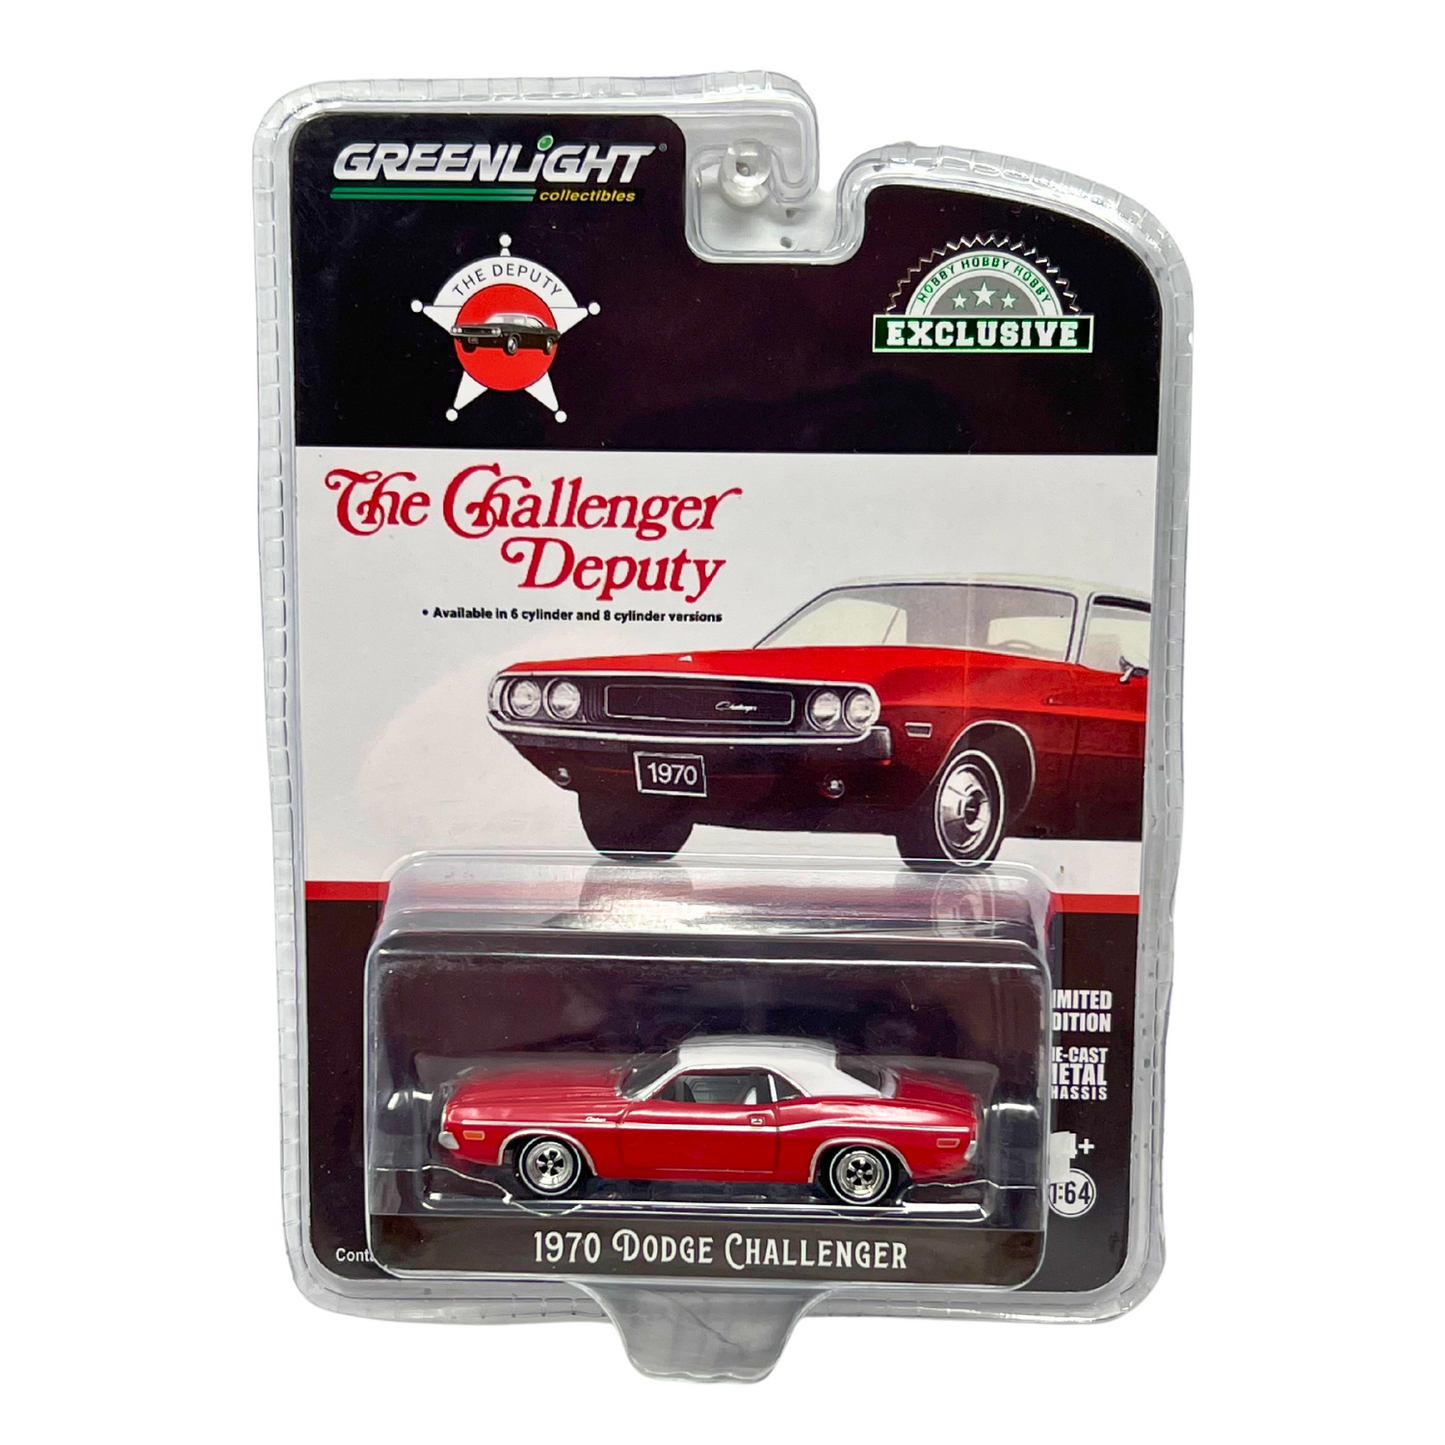 Greenlight Hobby Excl. The Challenger Deputy 1970 Dodge Challenger 1:64 Diecast